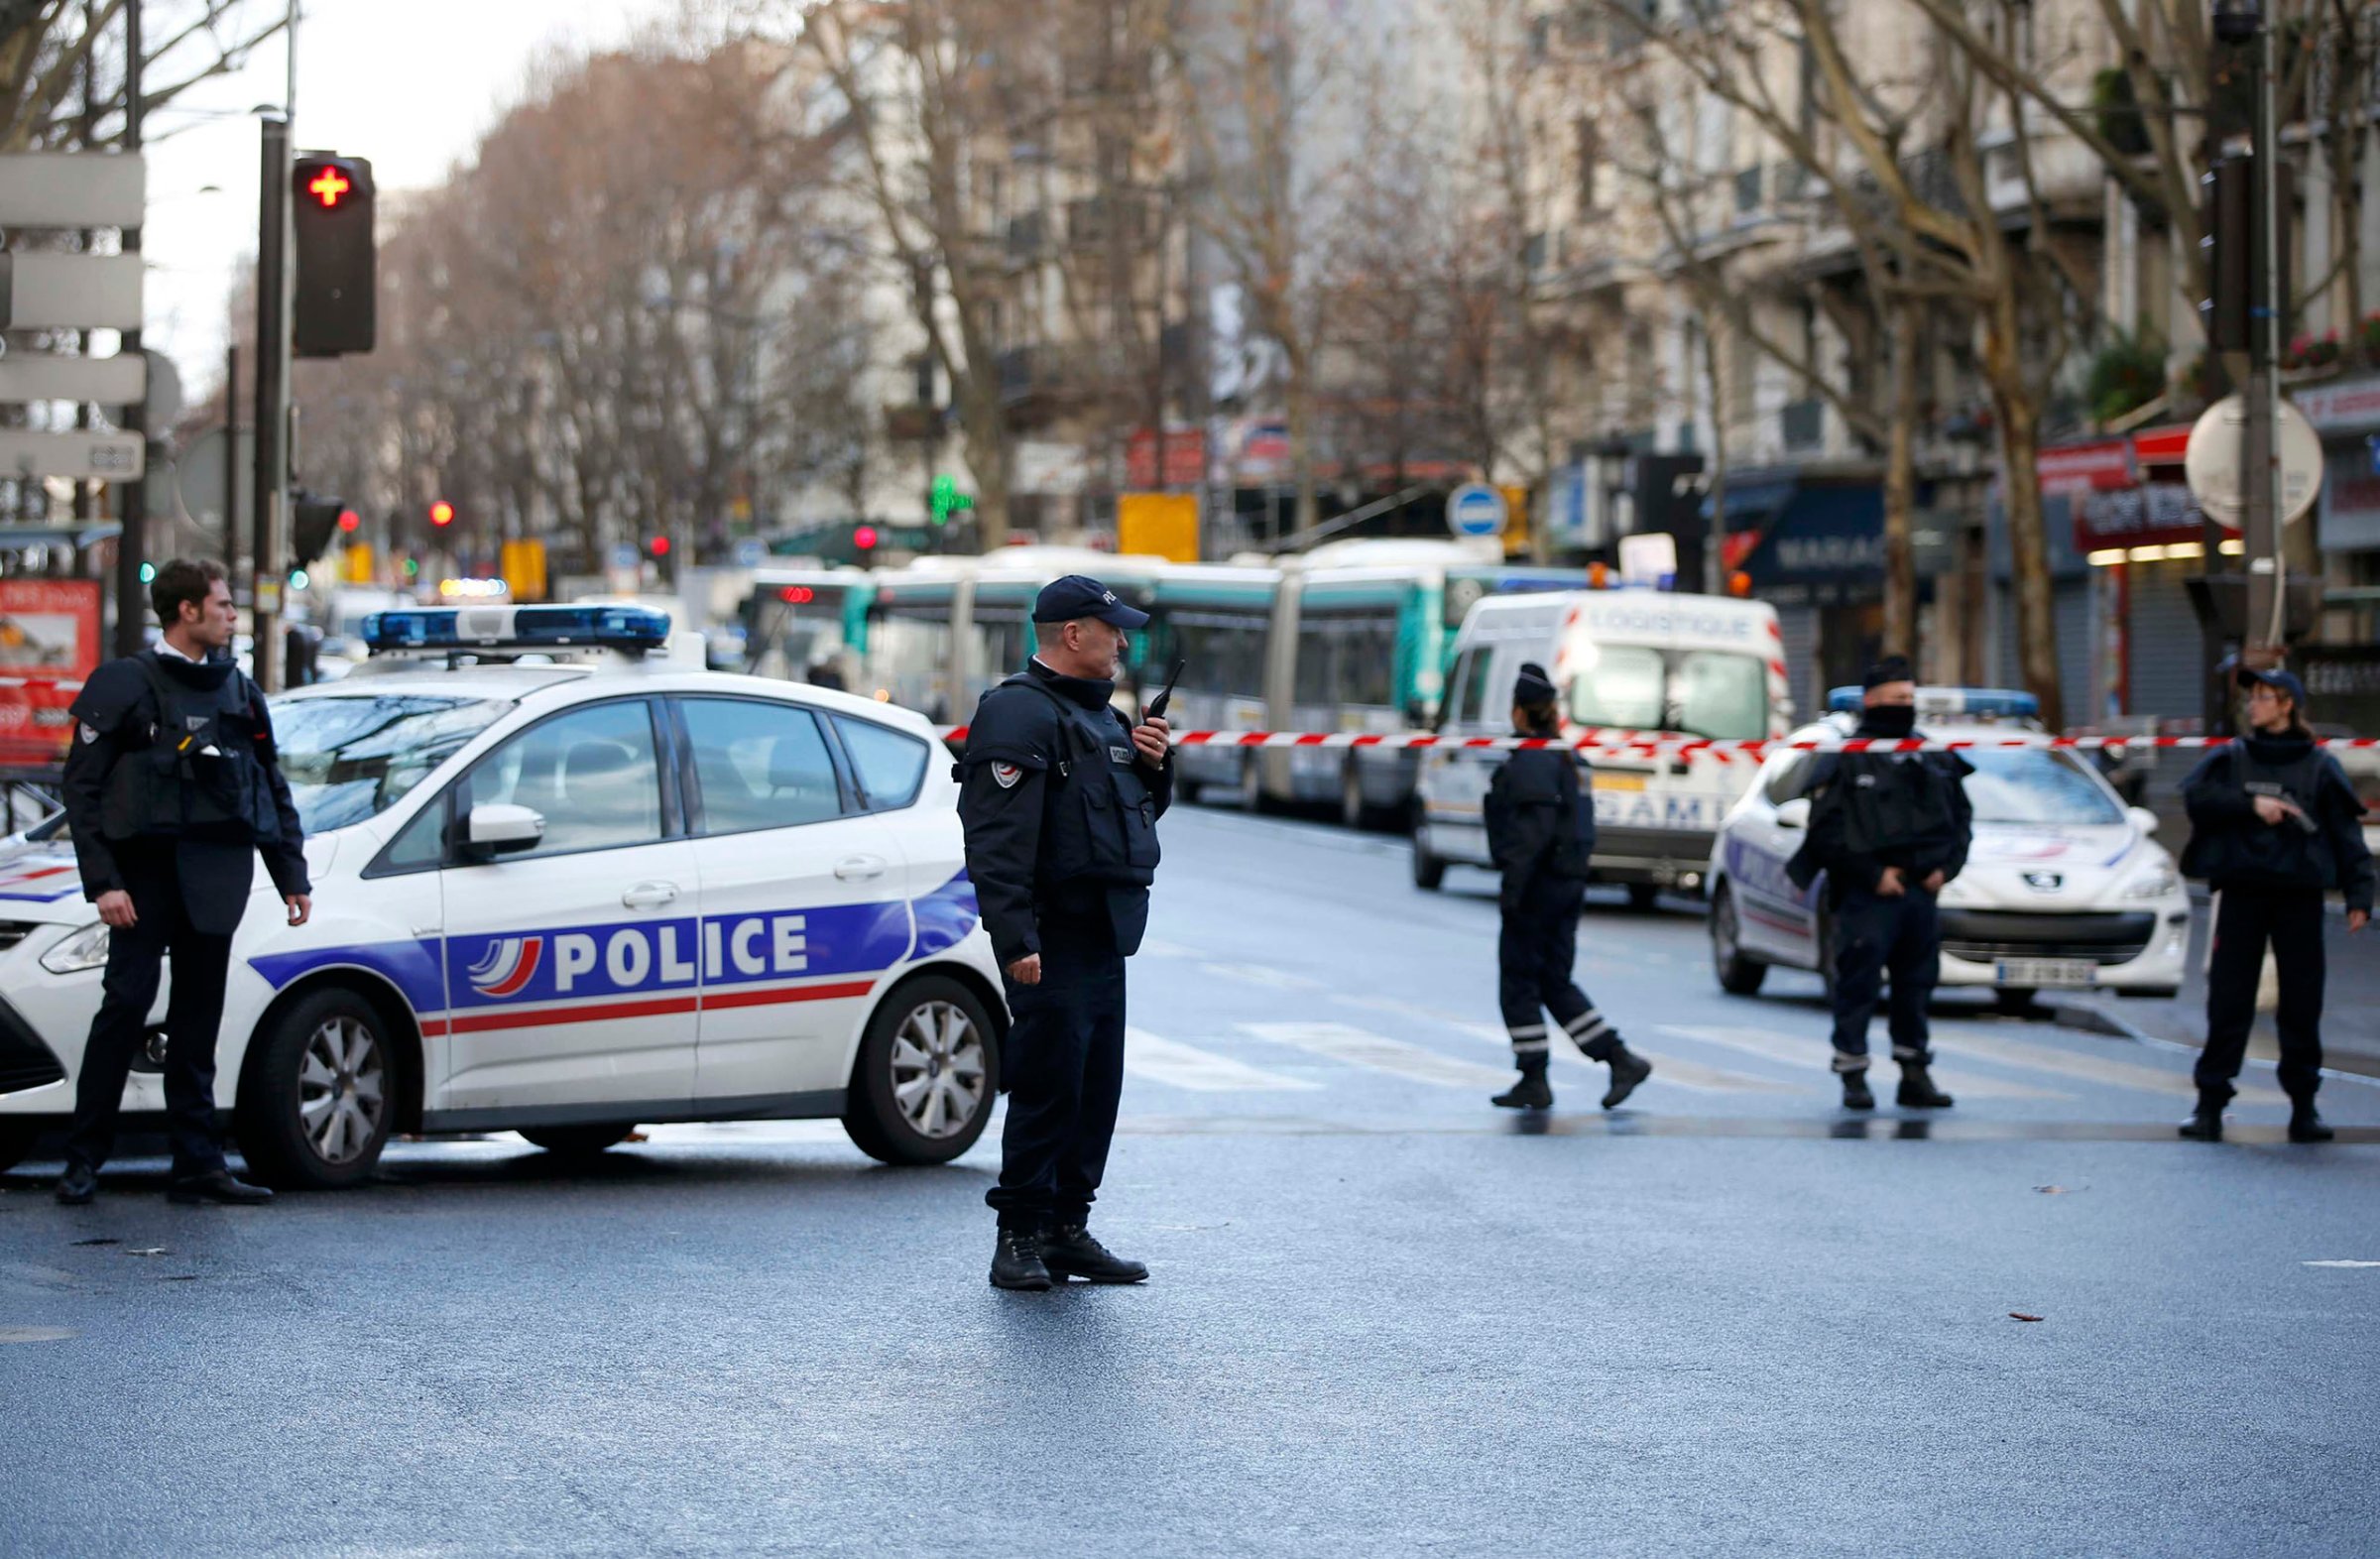 French police secure the area after a knife-wielding man was shot dead after attempting to enter a police station in the 18th district in Paris, Jan. 7, 2016.